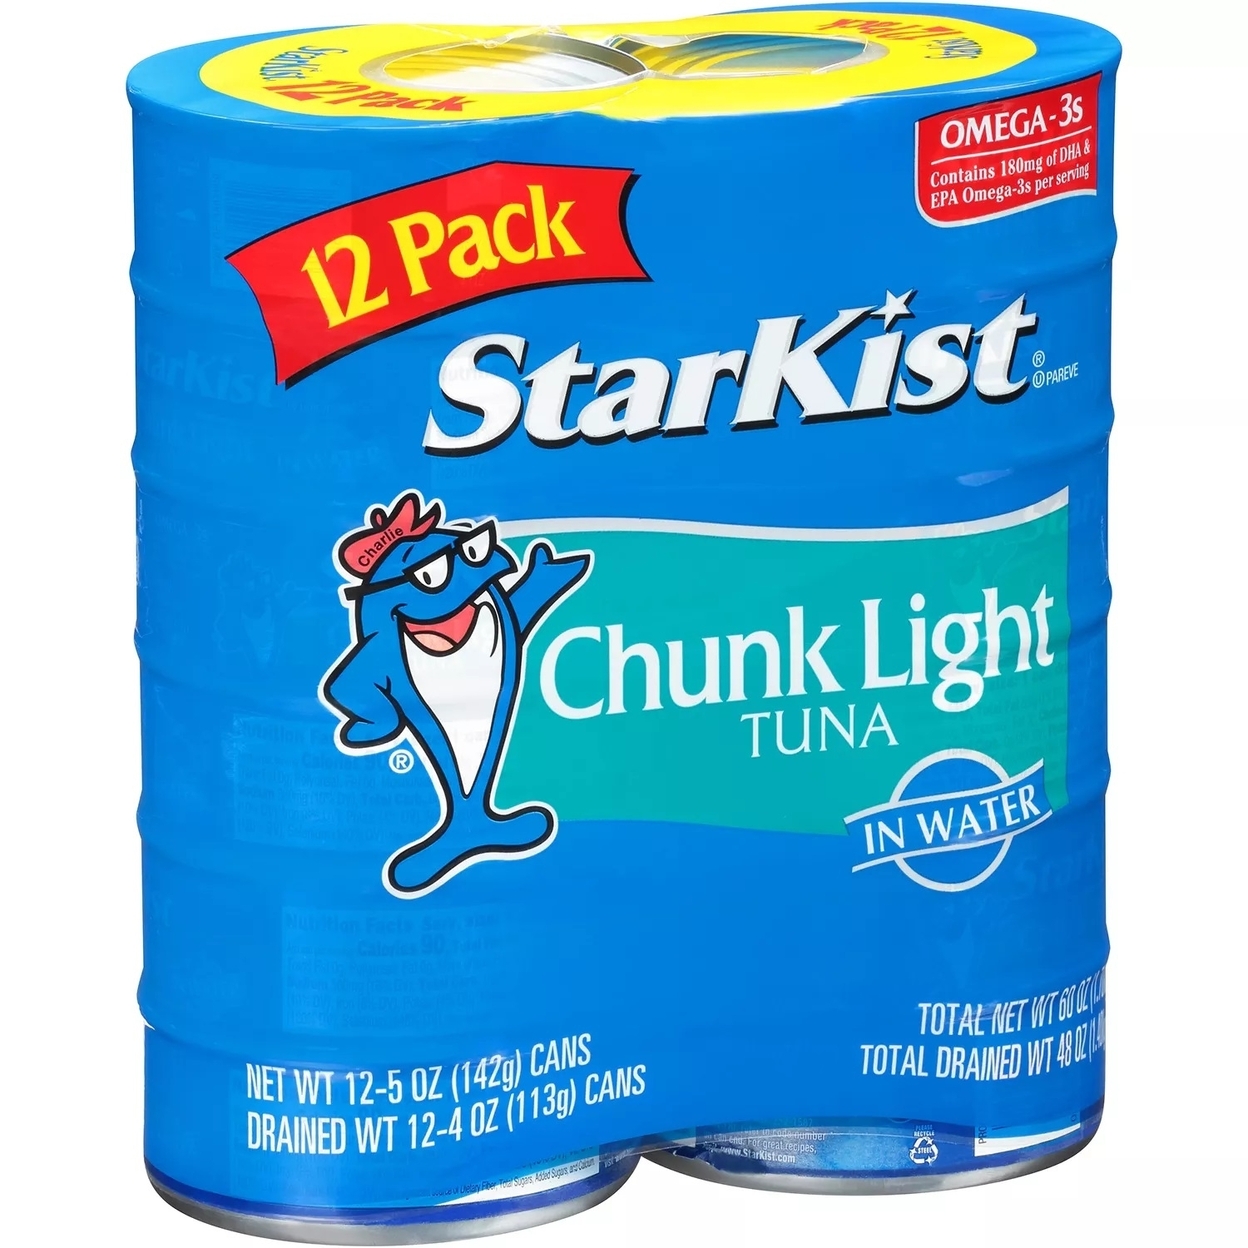 Starkist Chunk Light Tuna in Water 5 Ounce Can (Pack of 12) - image 3 of 5